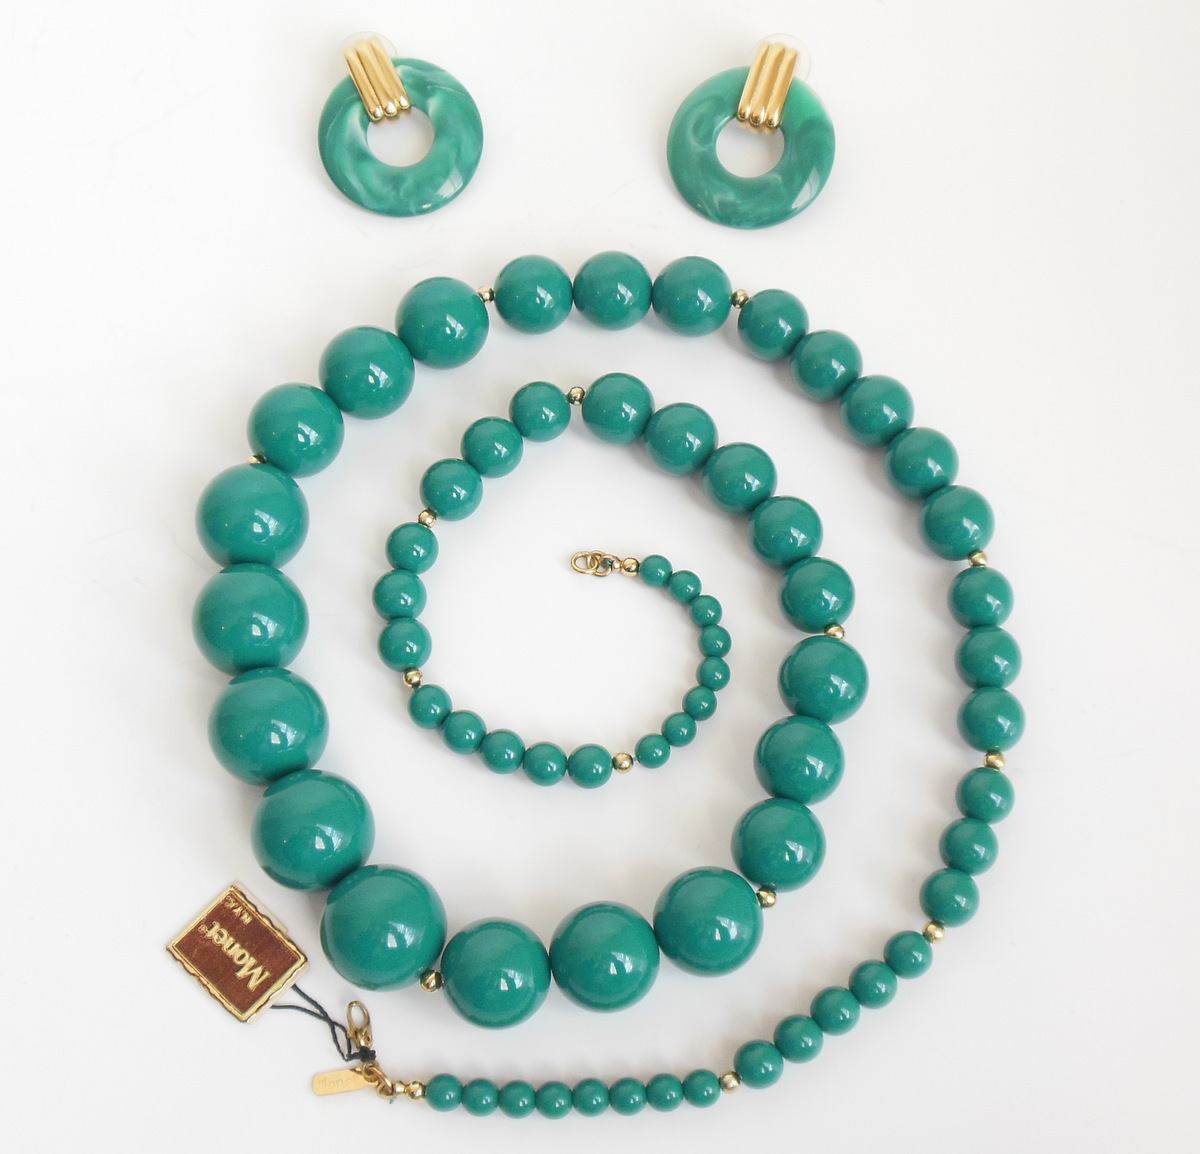 Primary image for Vintage Monet Graduated Teal Bead Necklace Pierced Disc Earrings Jewelry Set